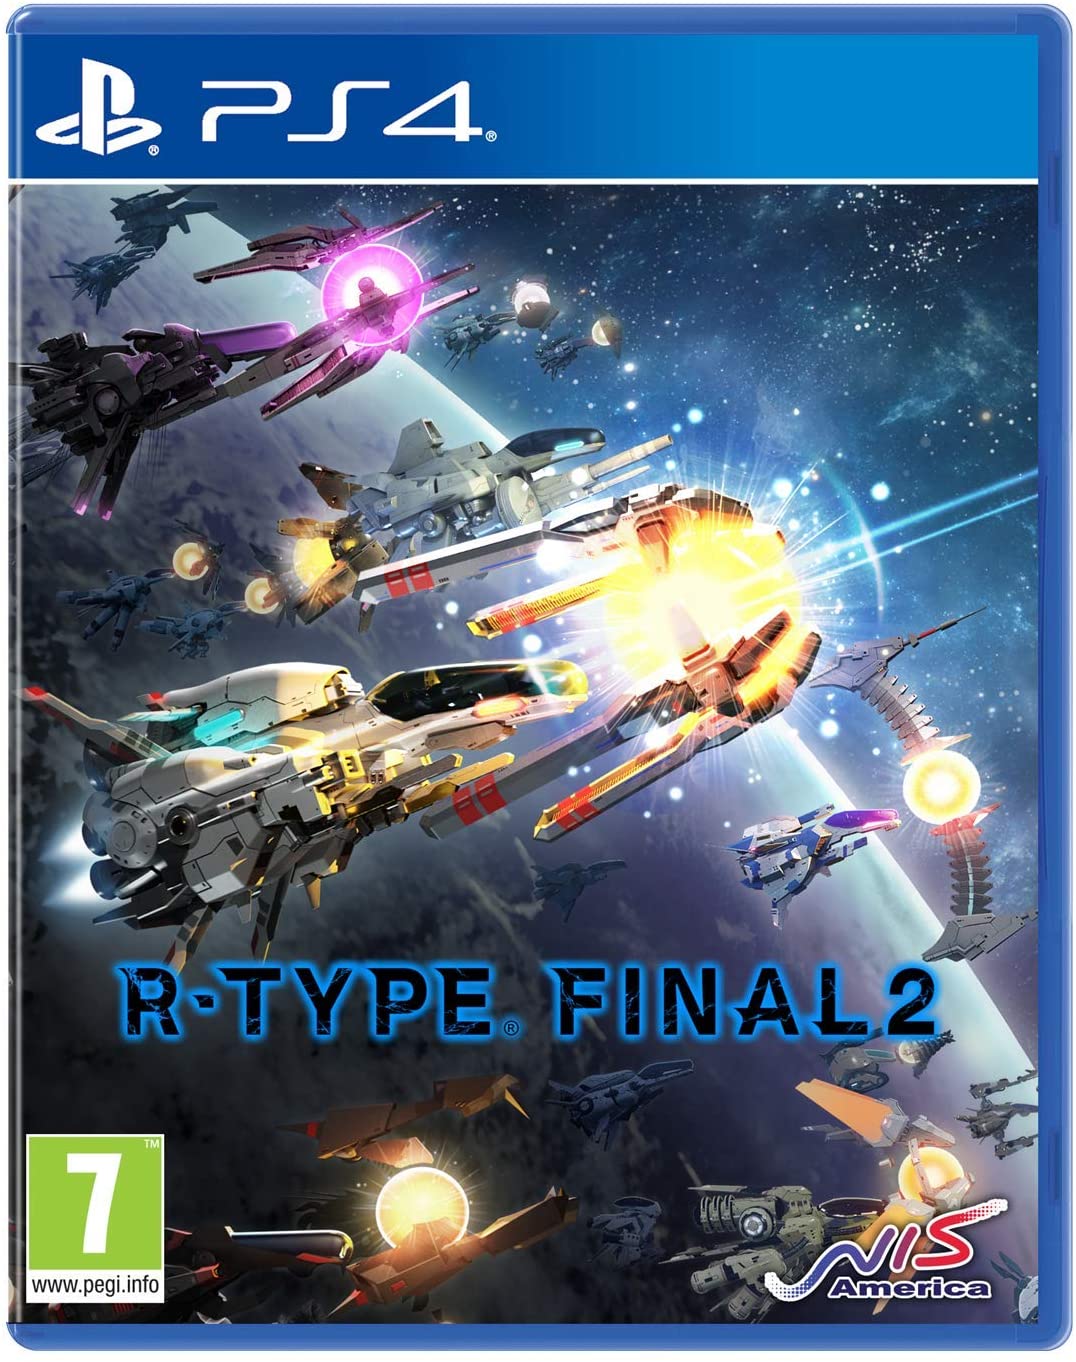 R-Type Final 2 Inaugural Flight Edition - PS4